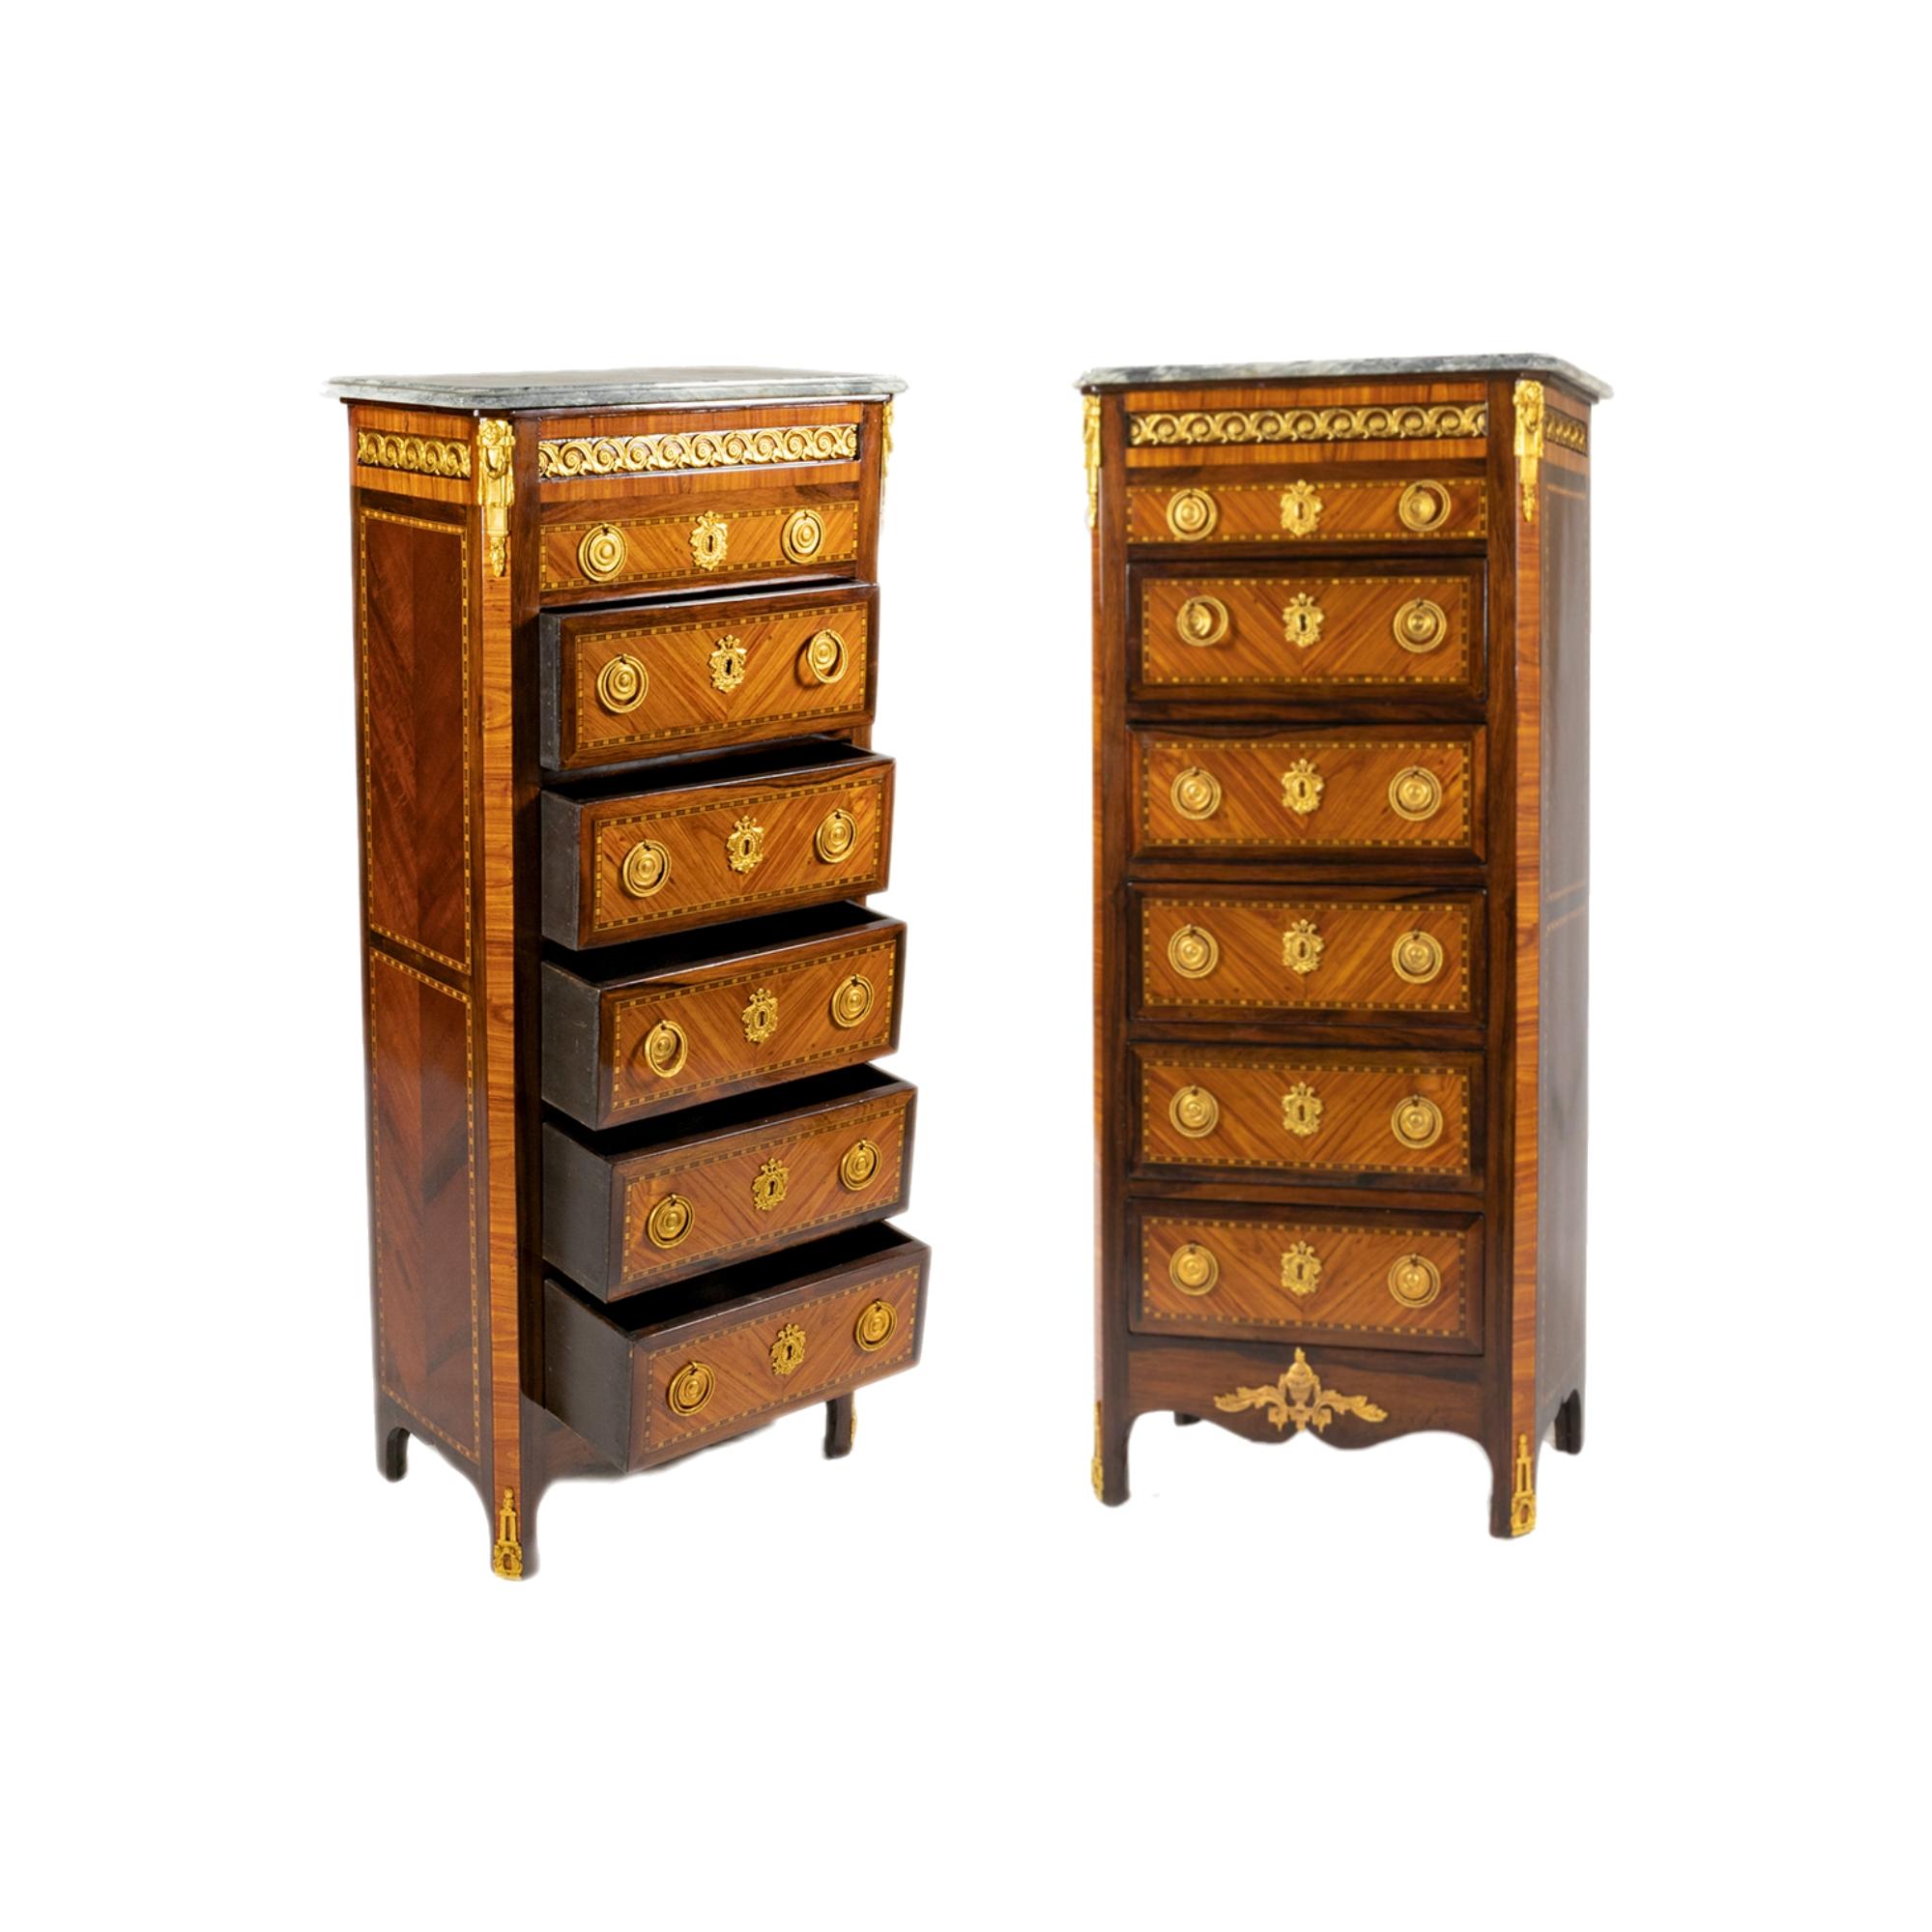 A 19th Century Transitional Style Five-Drawer Chiffonier with marble top and gilded bronzes mounts, handles and marqueterie of the chest of drawers canted with bronze corners, paneled sides with matched parquetry. 
It stands on very small legs,